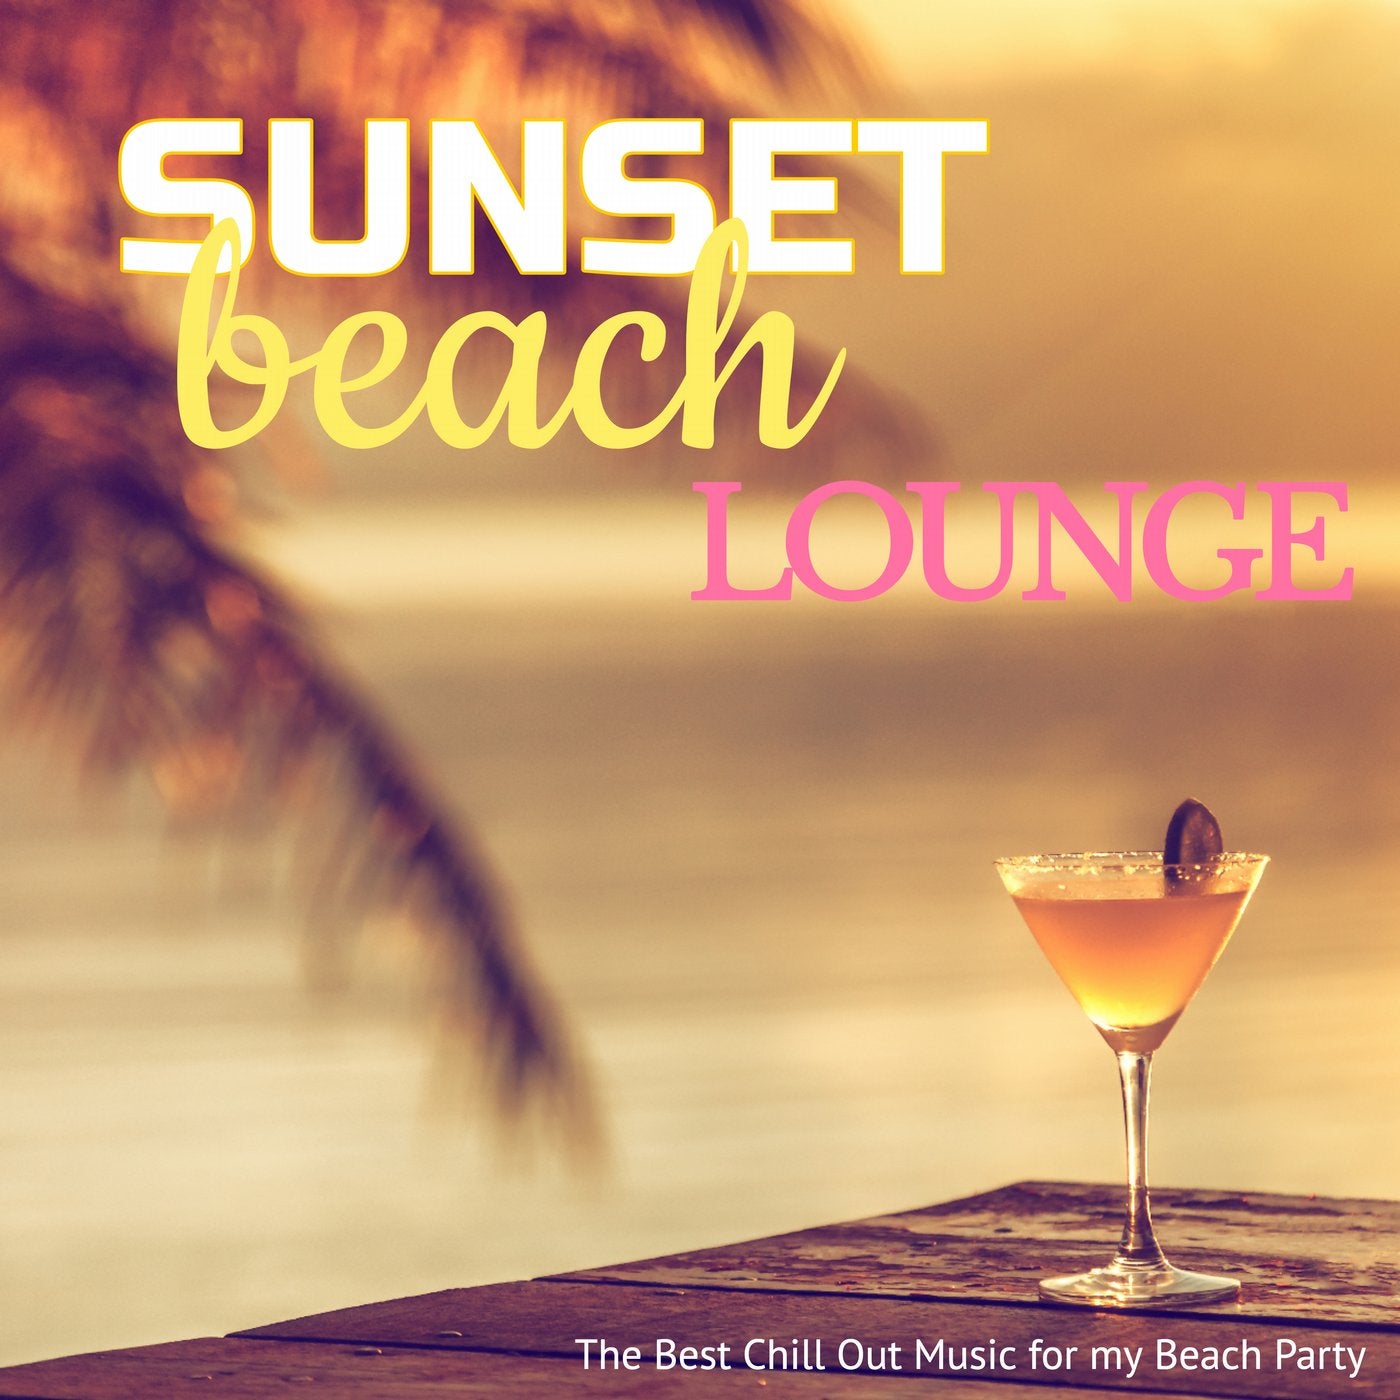 Sunset Beach Lounge: The Best Chill Out Music for My Beach Party